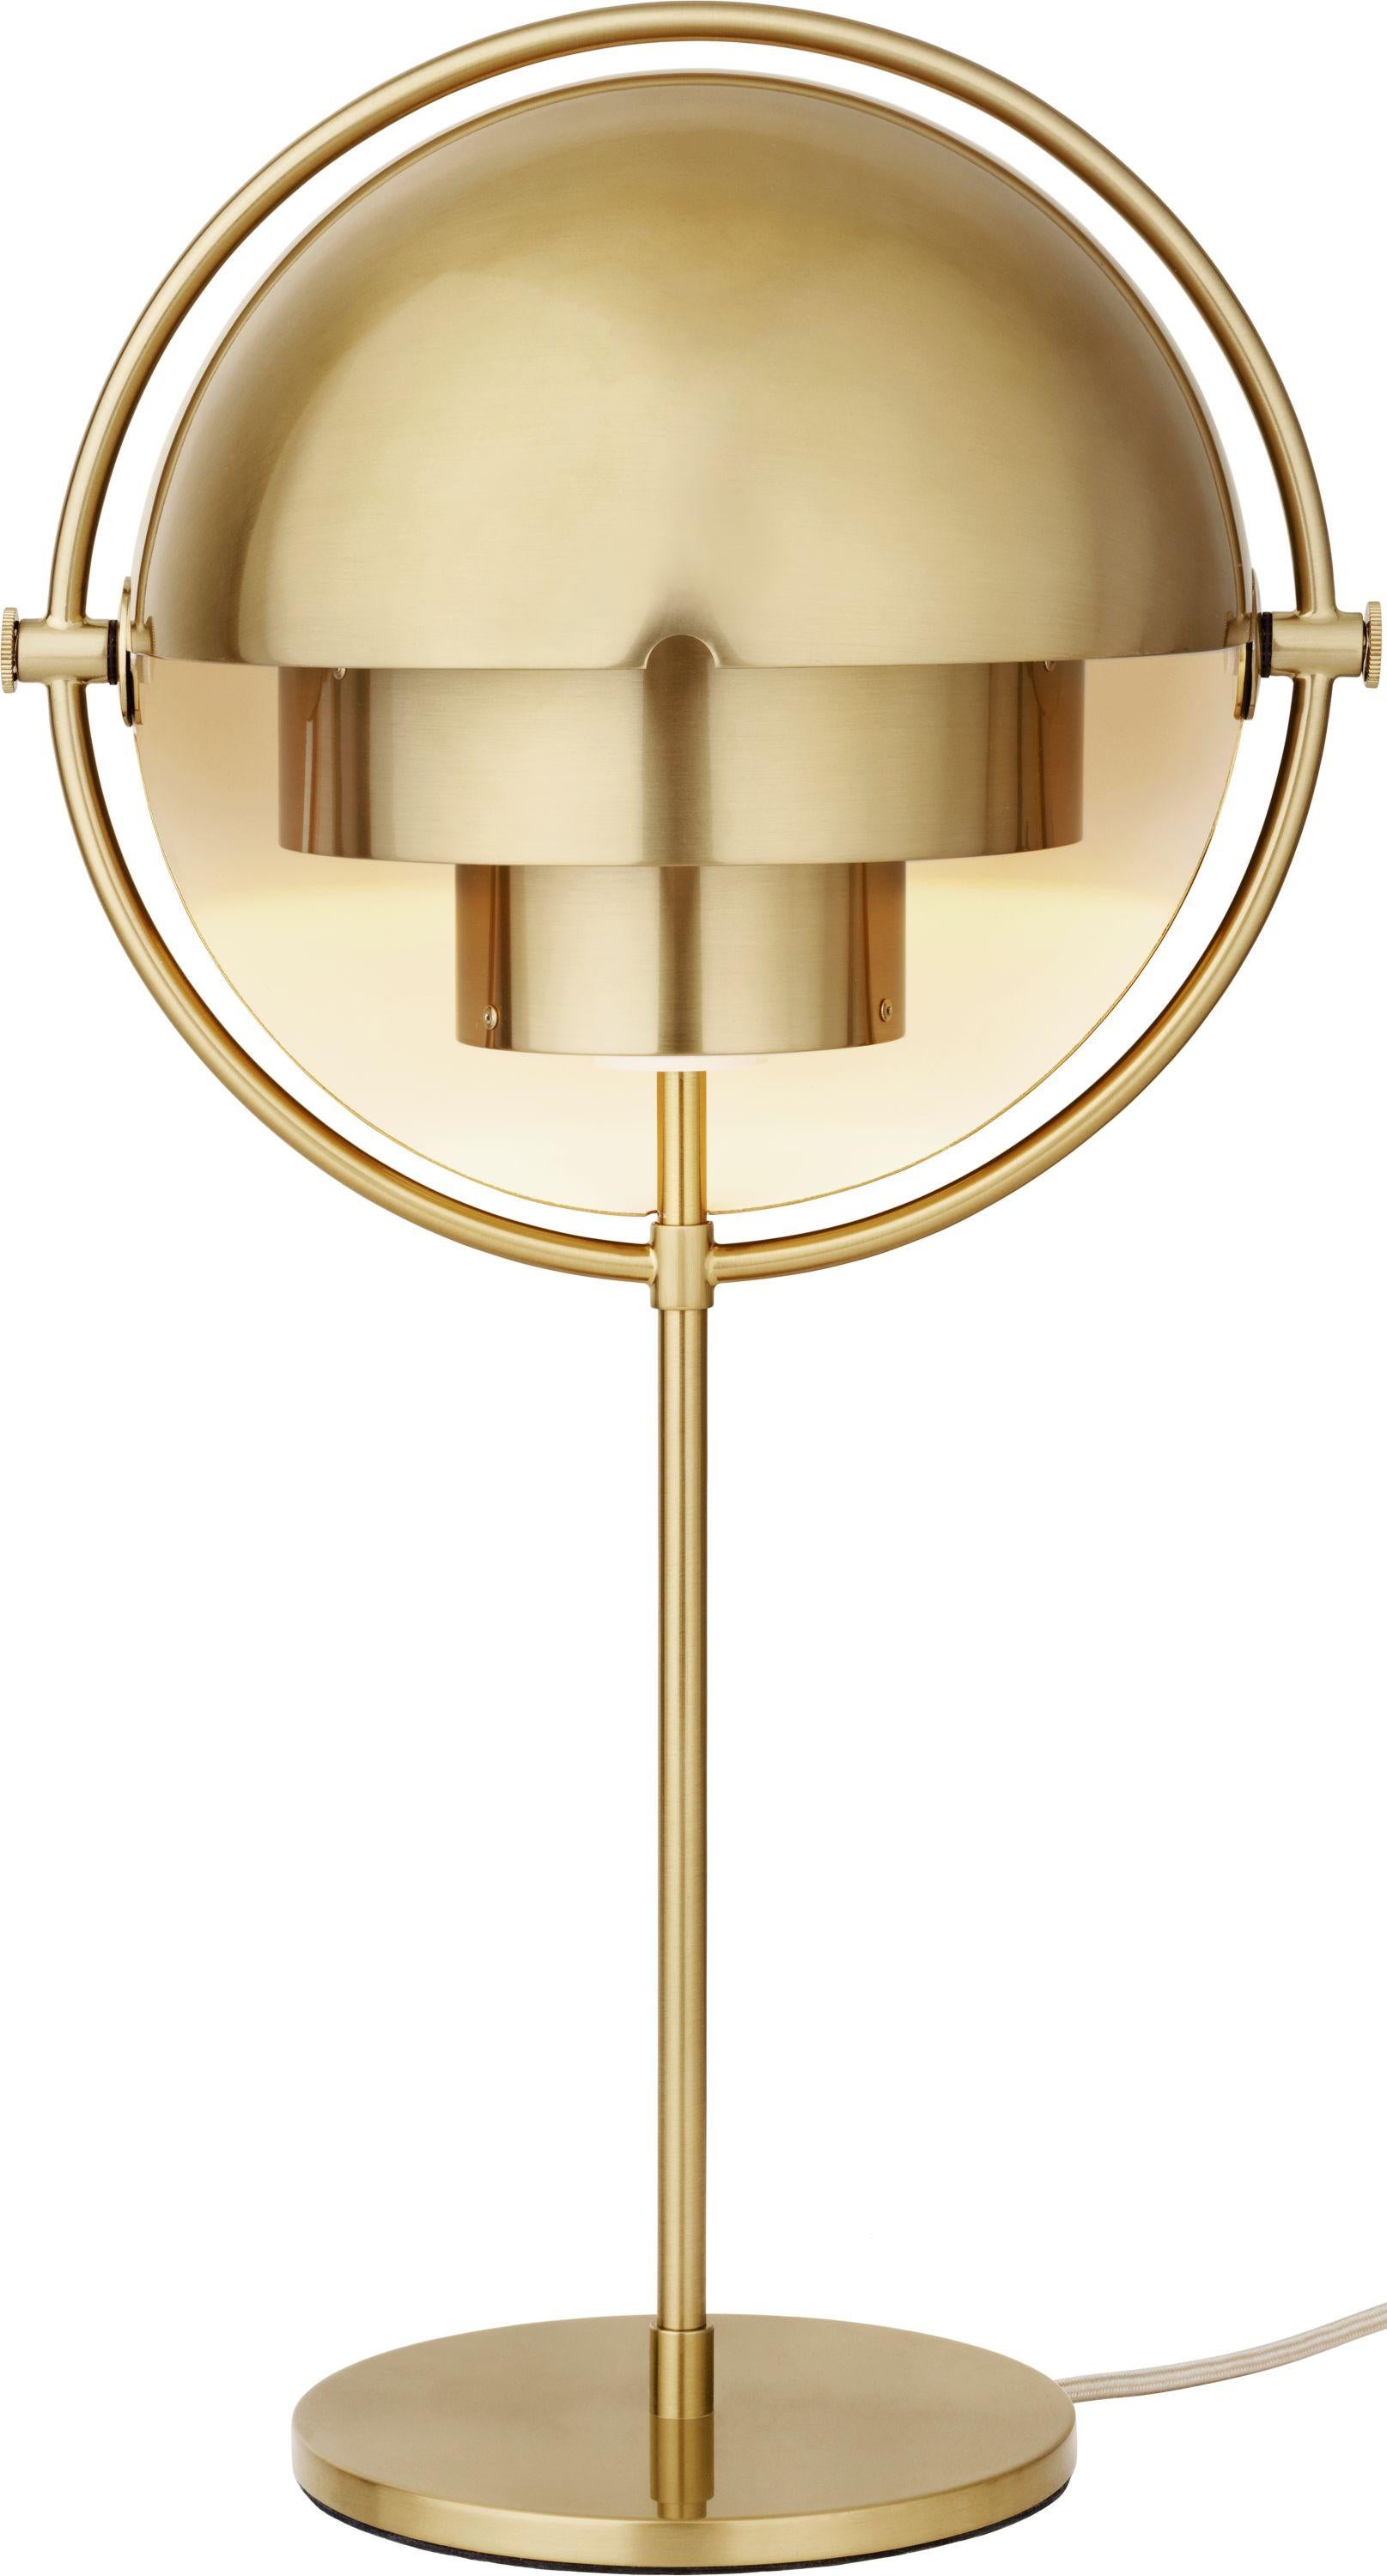 Louis Weisdorf 'Multi-Lite' table lamp in brass. Designed in 1972 by Weisdorf, this is a newly produced authorized re-edition by GUBI of Denmark who meticulously reproduce his work with scrupulous attention to detail and materials that are faithful